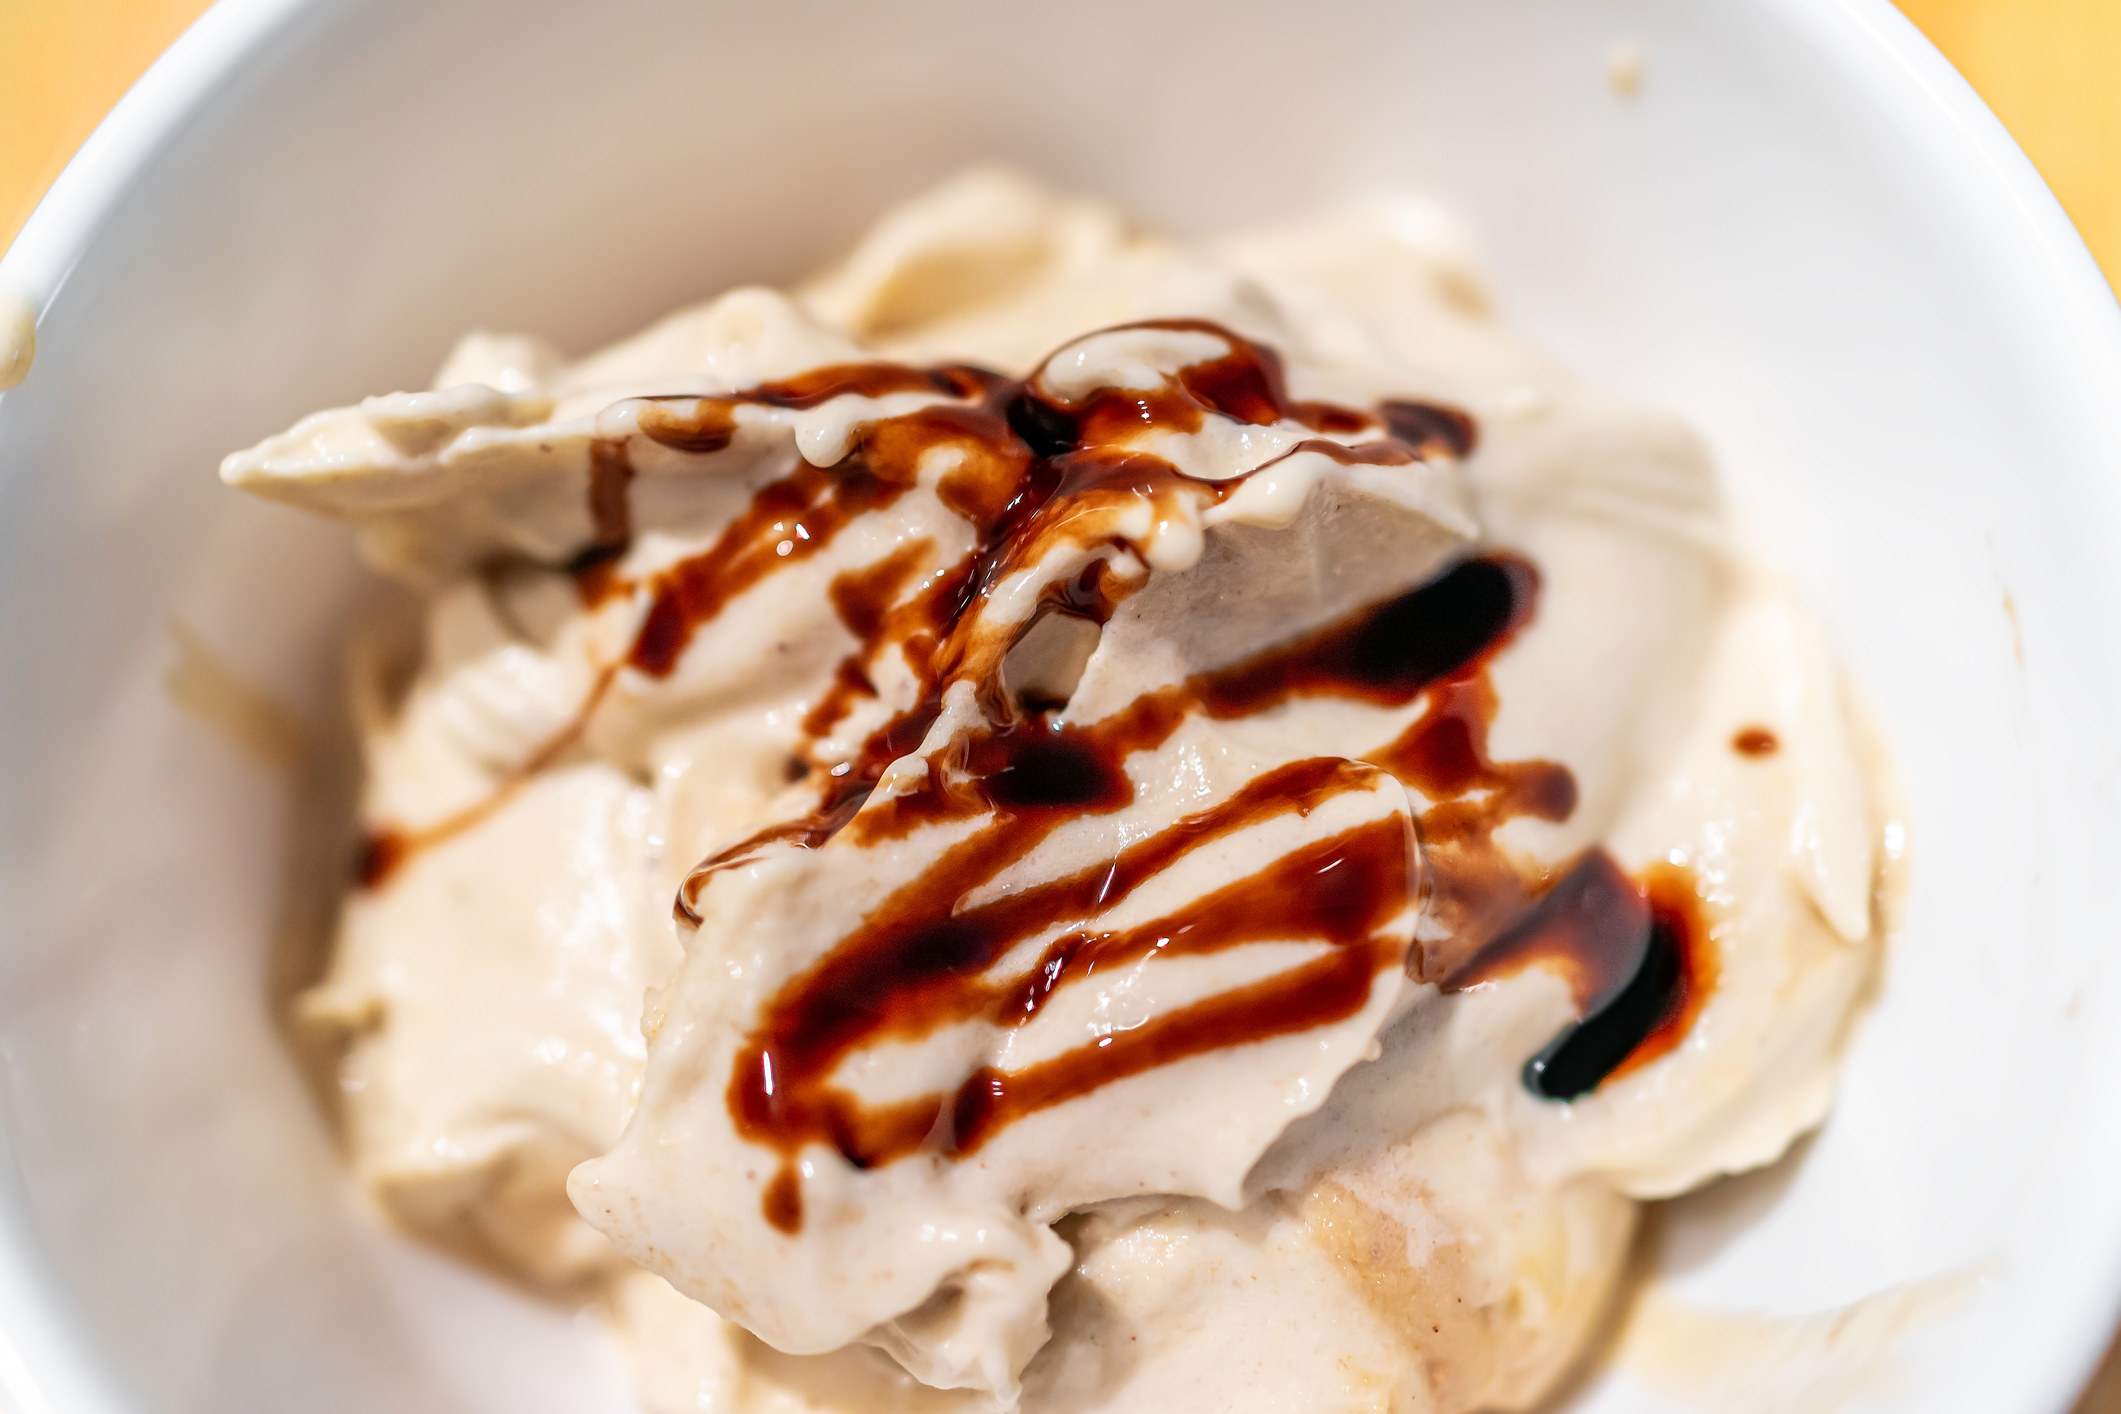 Ice cream topped with balsamic